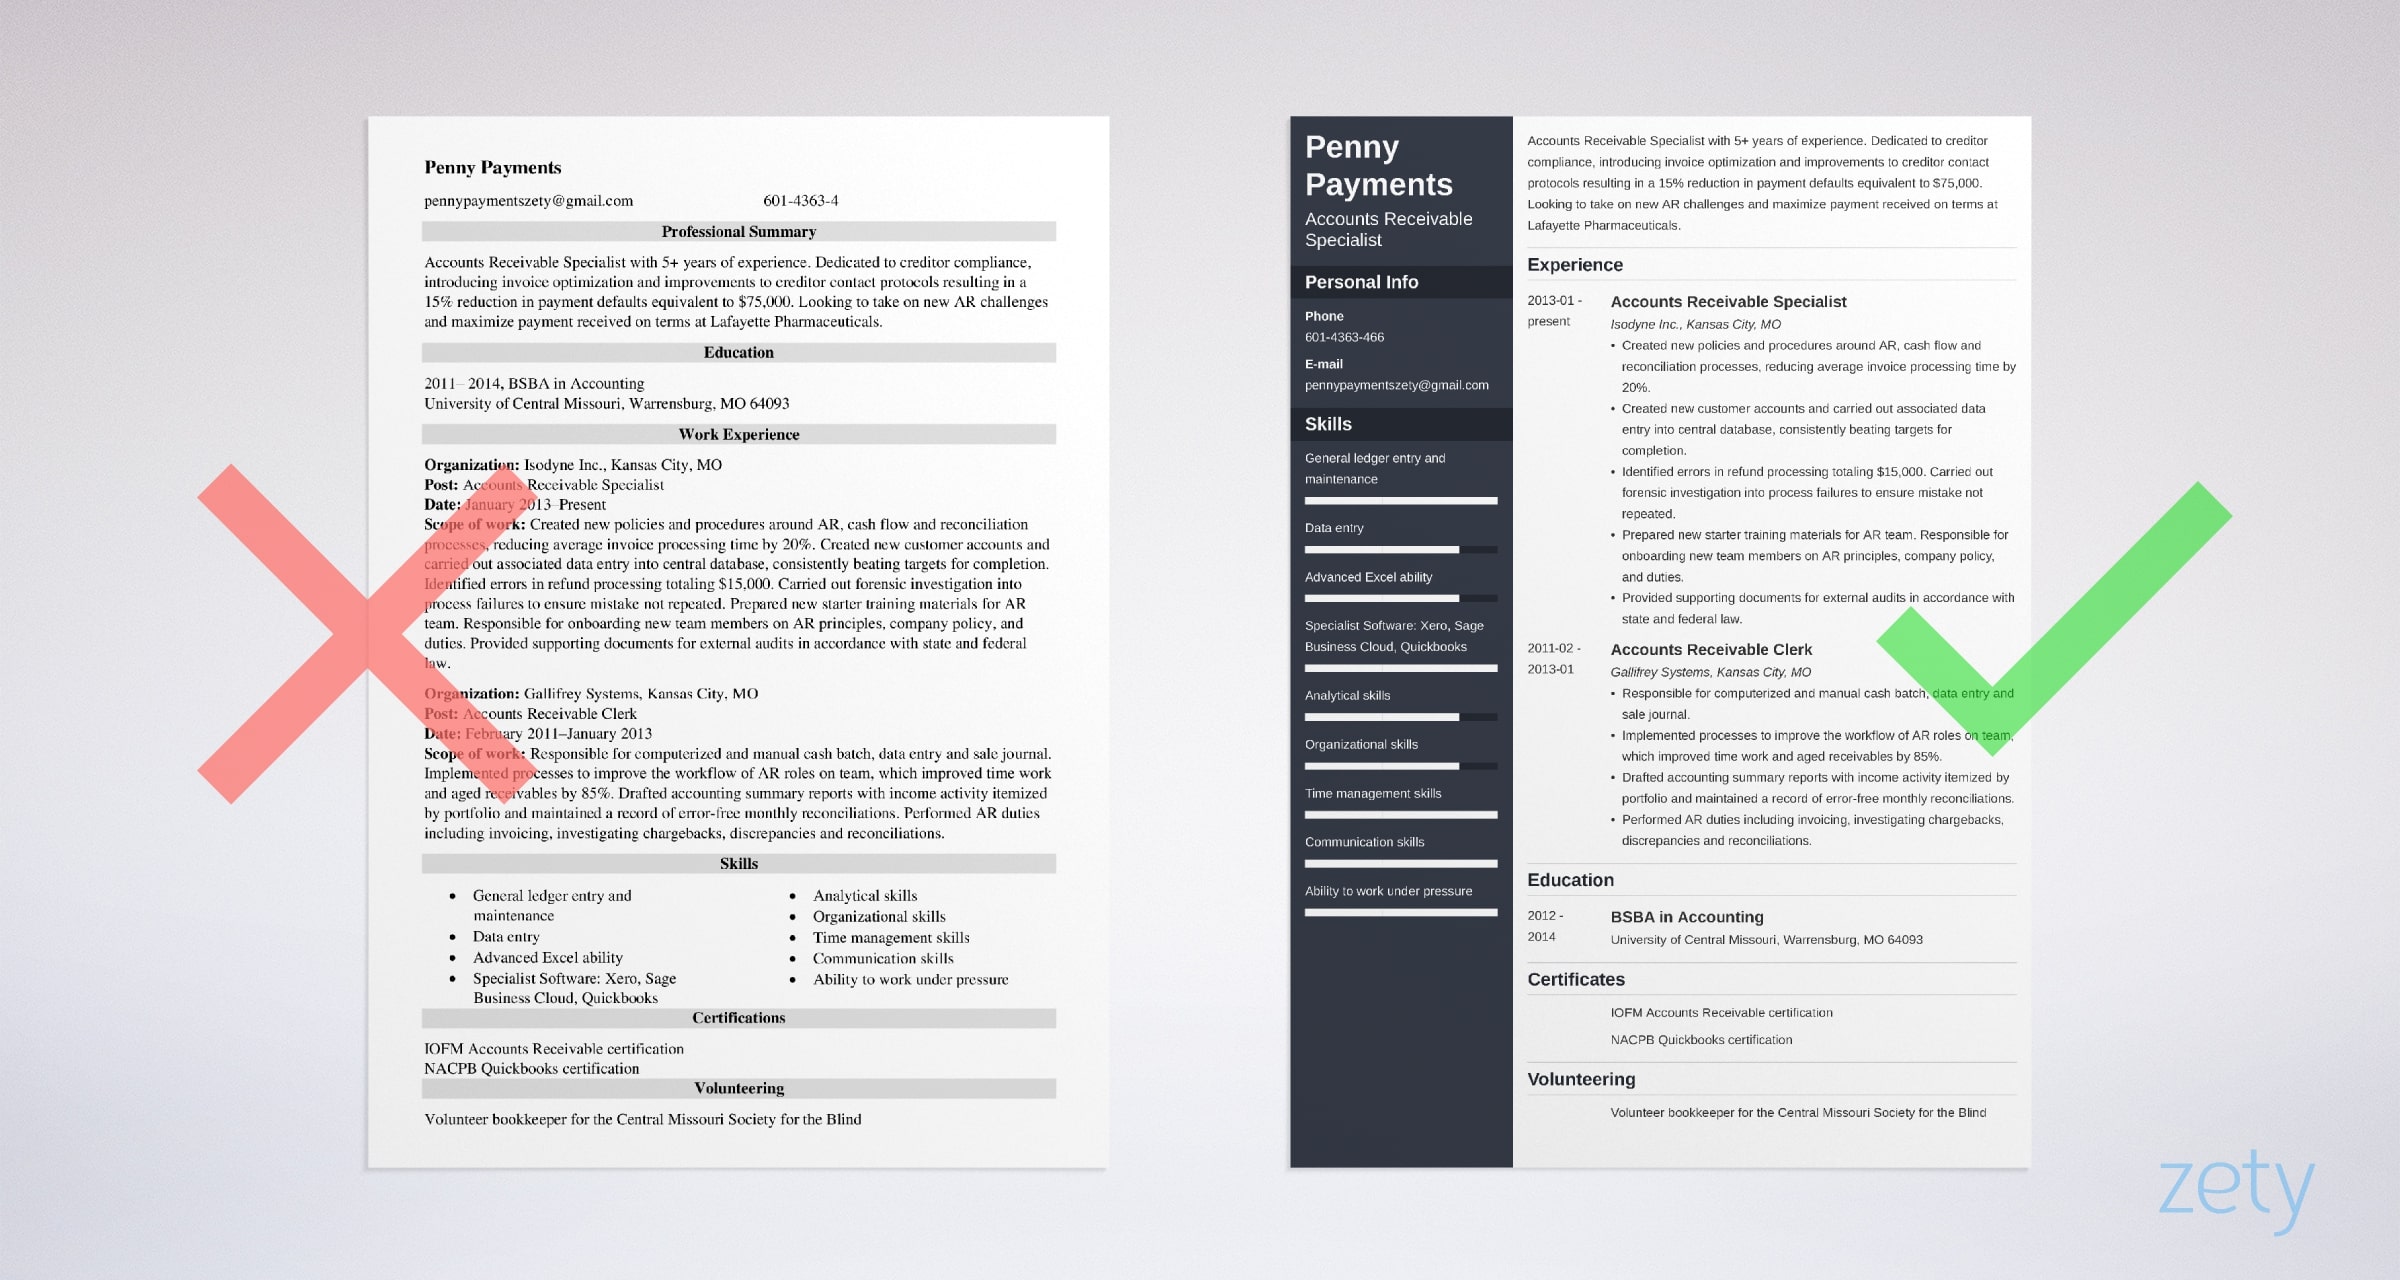 Accounts Receivable Resume Samples [20+ AR Examples]